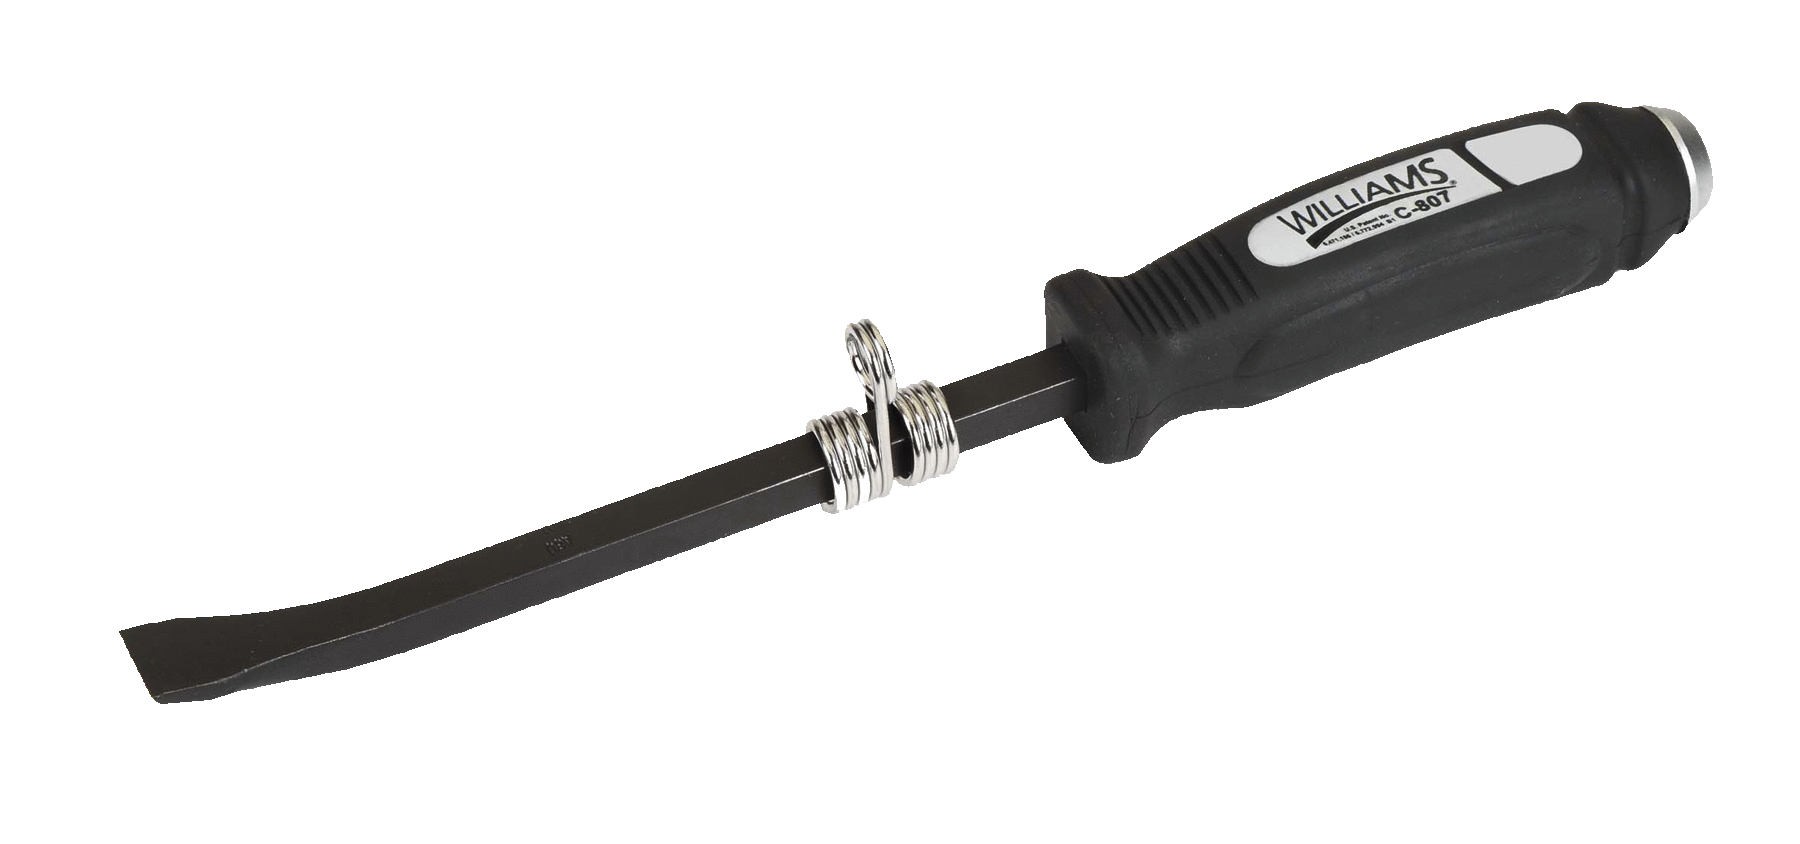 Pry Bars - Screwdriver Type with Safety Coil | SNAP-ON